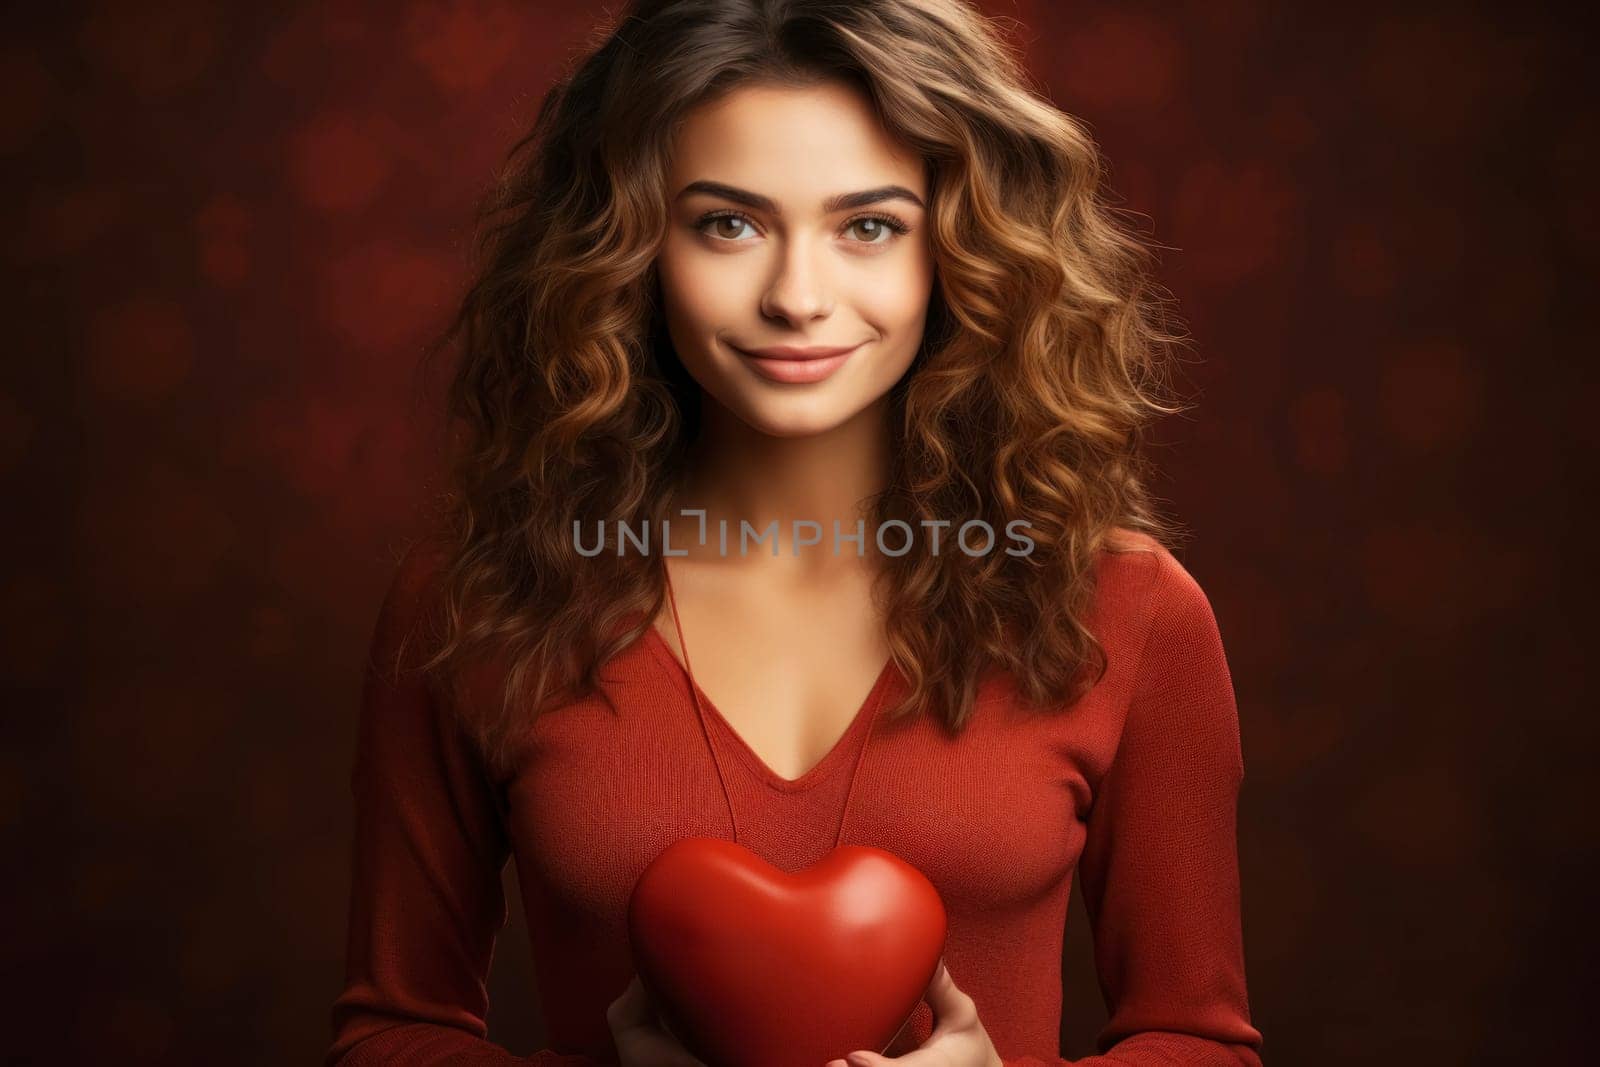 A beautiful woman with a heart-shaped red toy against a red backdrop by andreyz